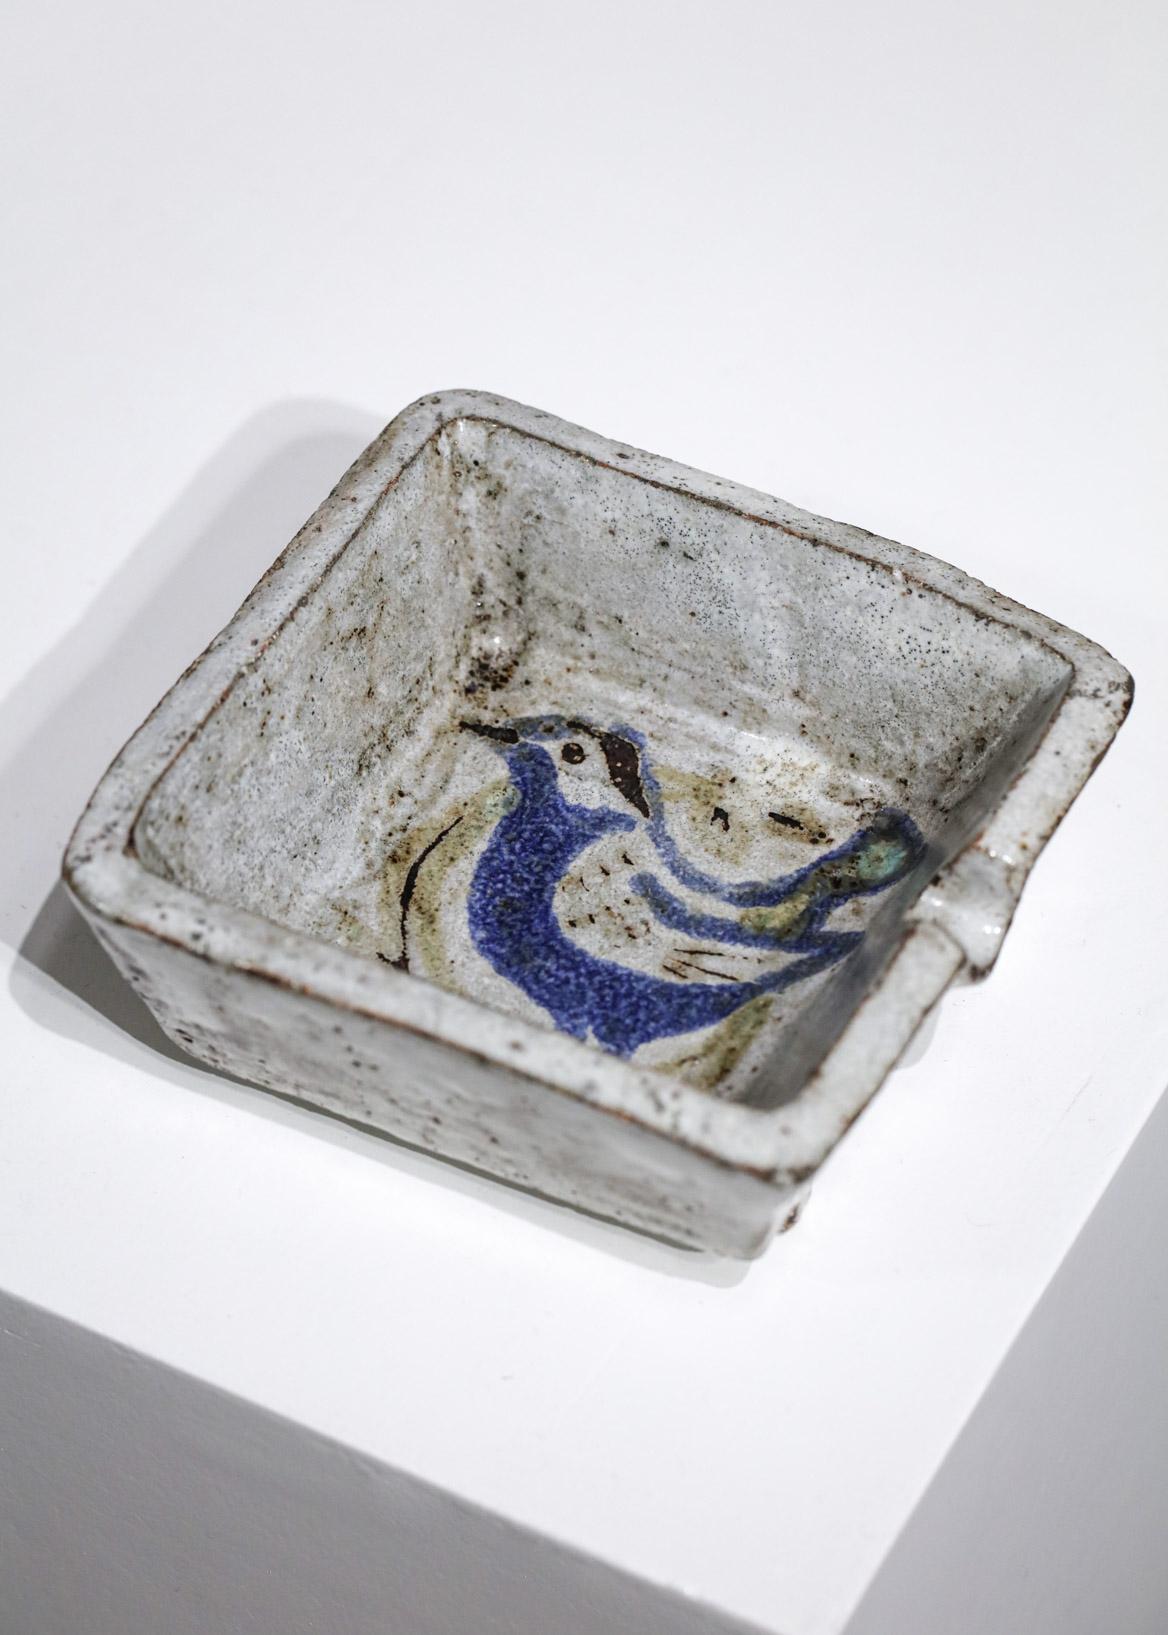 Square ashtray from the 50's by the French ceramist Jean Derval from Vallauris. Very nice glazing on the whole ashtray with a stylized drawing of a bird in the centre. Signature of the artist on the back of the ashtray, nice vintage condition (see